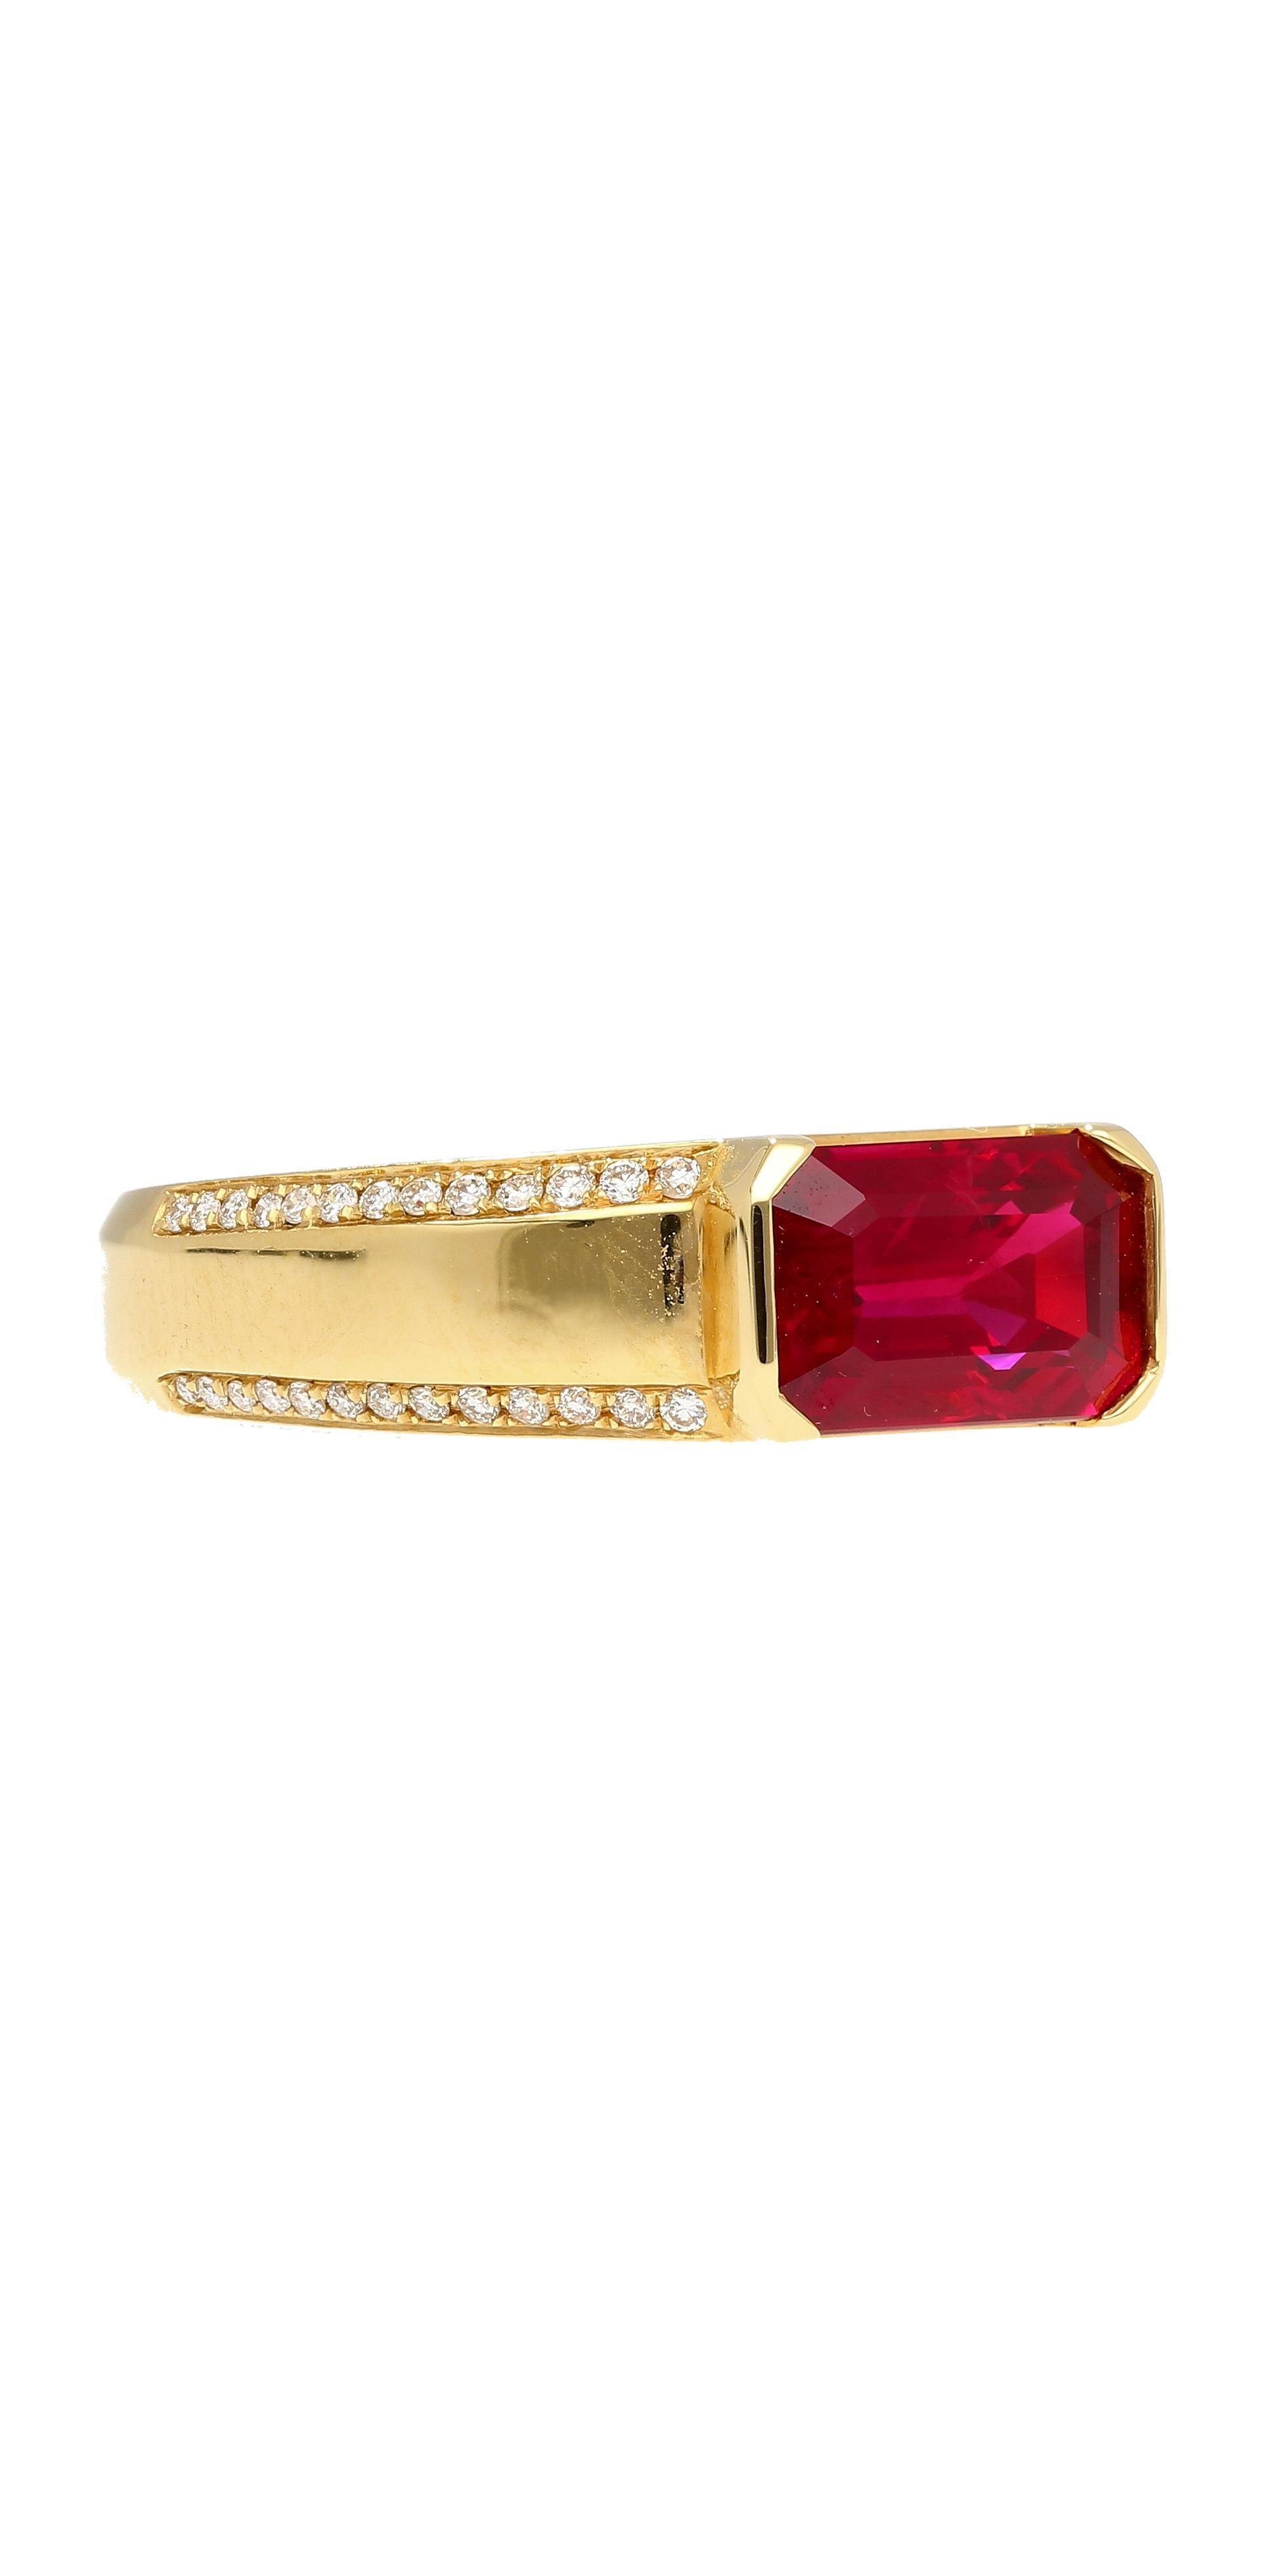 GIA and GRS certified 2.09 Carat Emerald Cut Ruby and Diamond East West Ring in 18K Solid Yellow Gold. 

This important Ruby center stone is a certified Vivid Red Pigeons Blood color. This Burma Ruby exhibits a vivid, bright red hue, closely